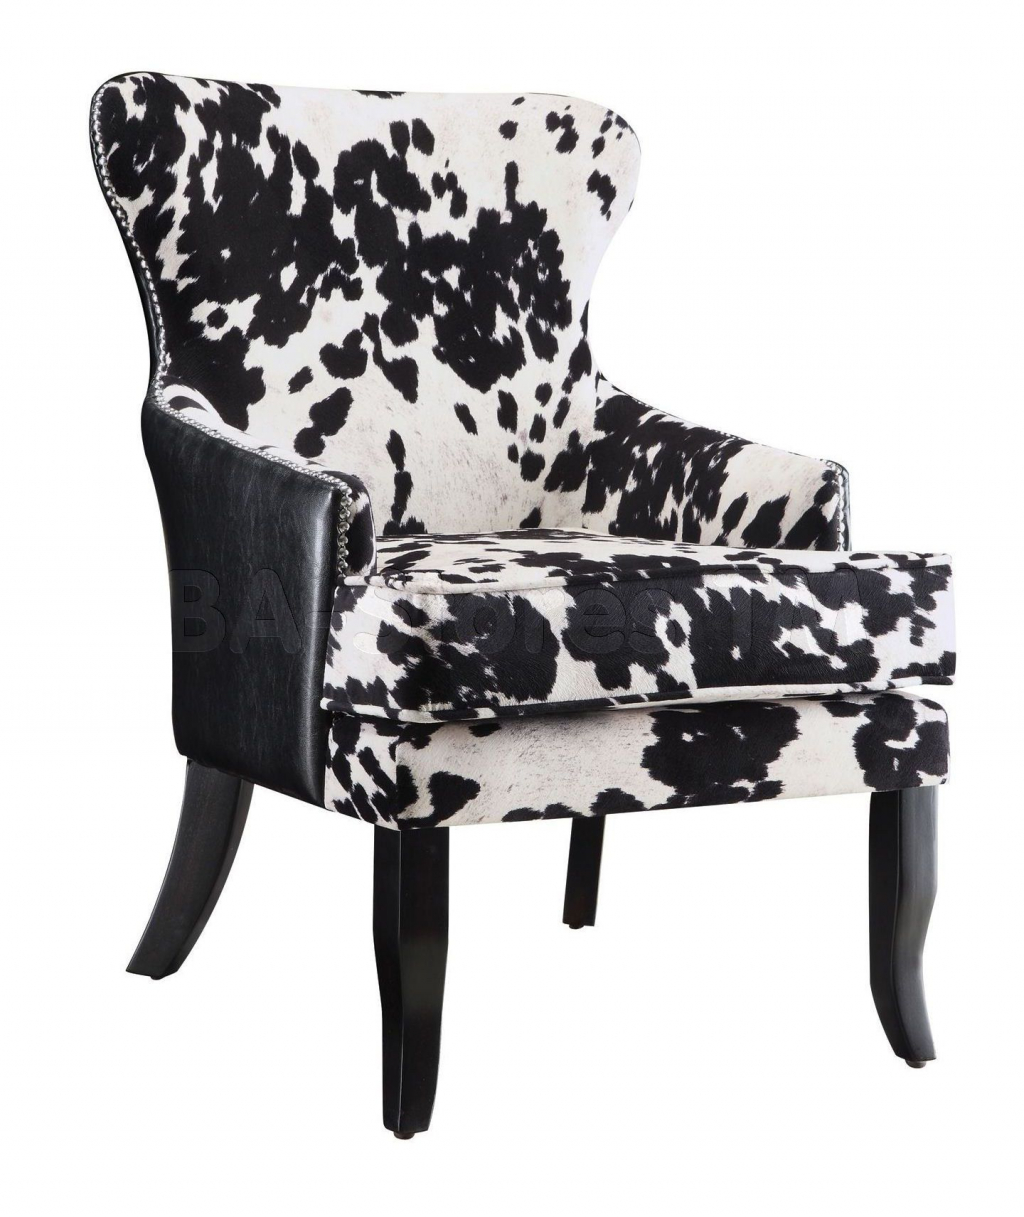 furniture cowhide dining chairs beautiful black white print accent chair stuff for room table plastic outdoor gray wood side maple bedside bathroom flooring target threshold